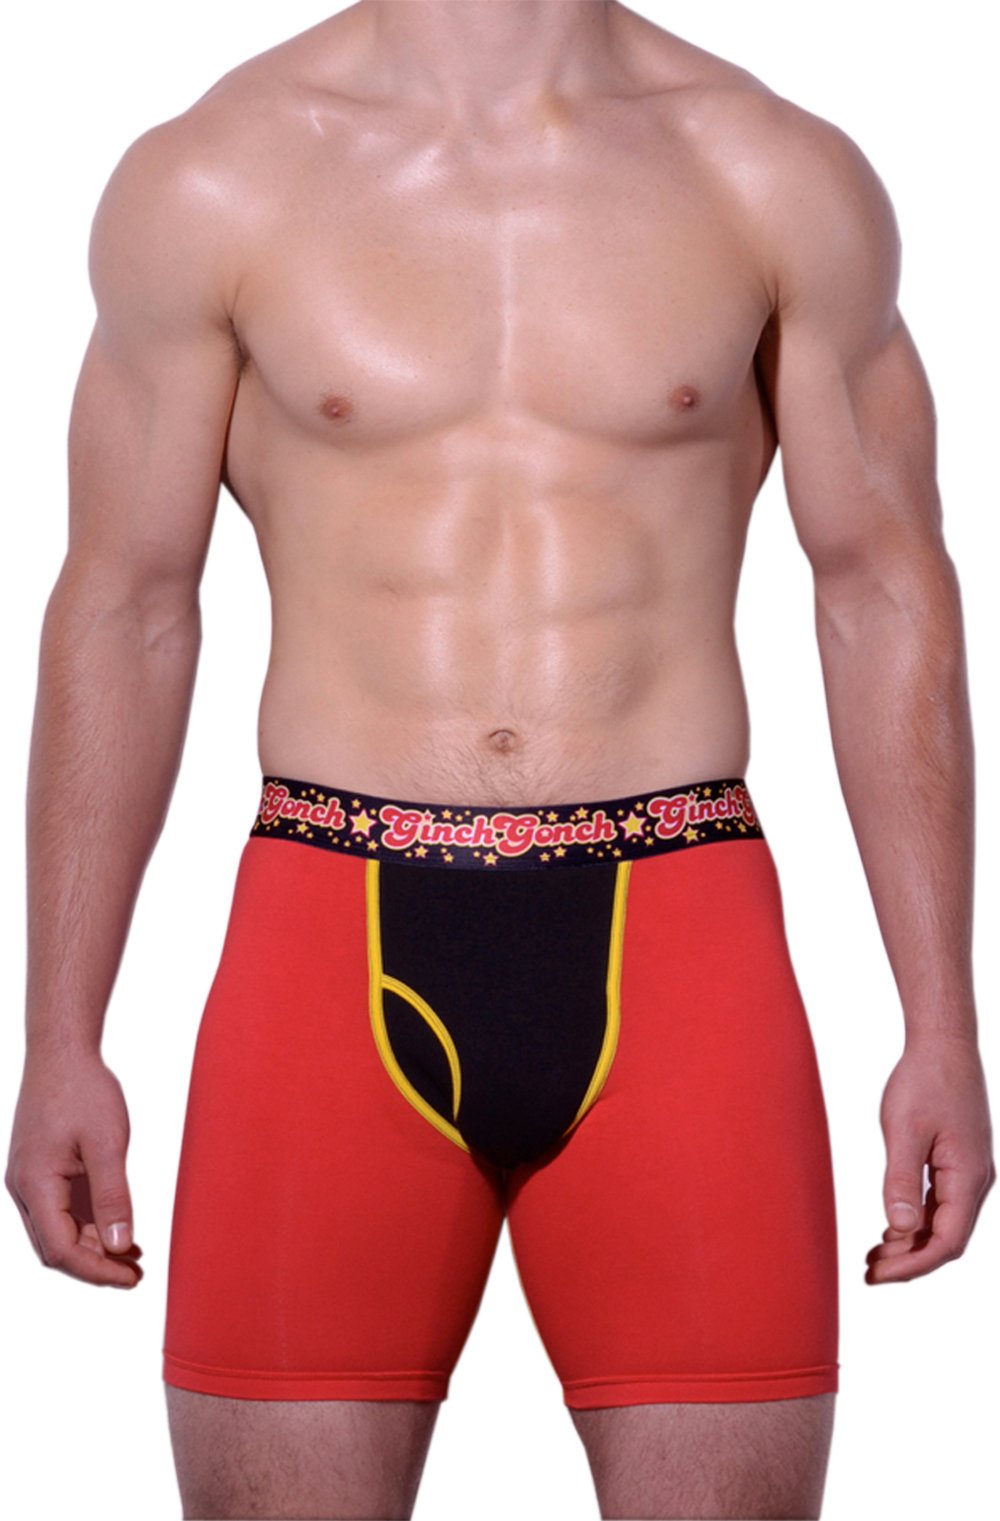 Atomic Fireballs Boxer Brief Trunk Men's Underwear Red and Black panels yellow trim printed waistband front